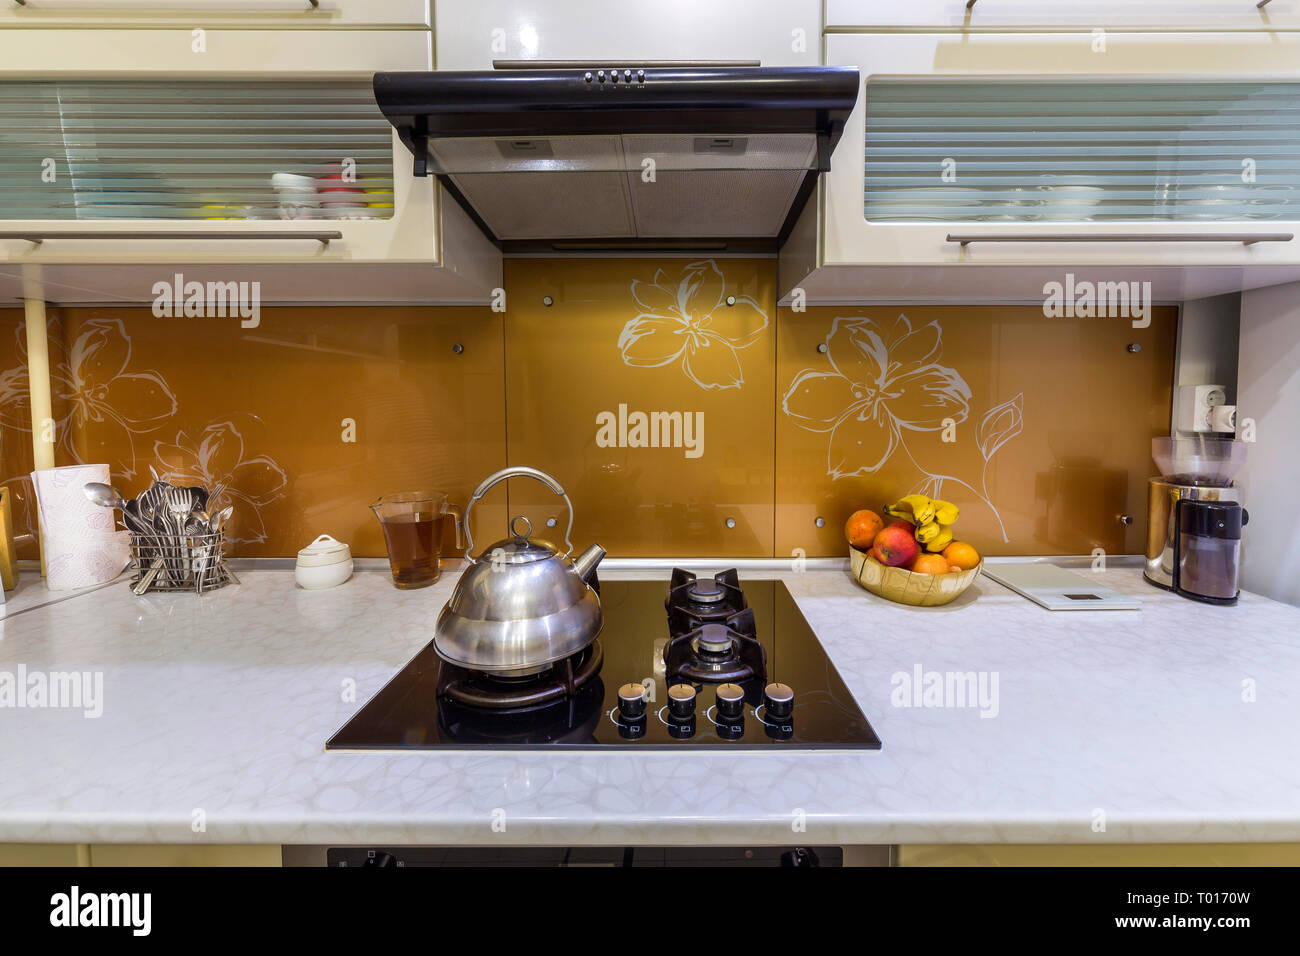 https://c8.alamy.com/comp/T0170W/shiny-stainless-tea-kettle-teapot-with-boiling-water-on-burning-gas-stove-on-modern-kitchen-yellow-interior-background-T0170W.jpg